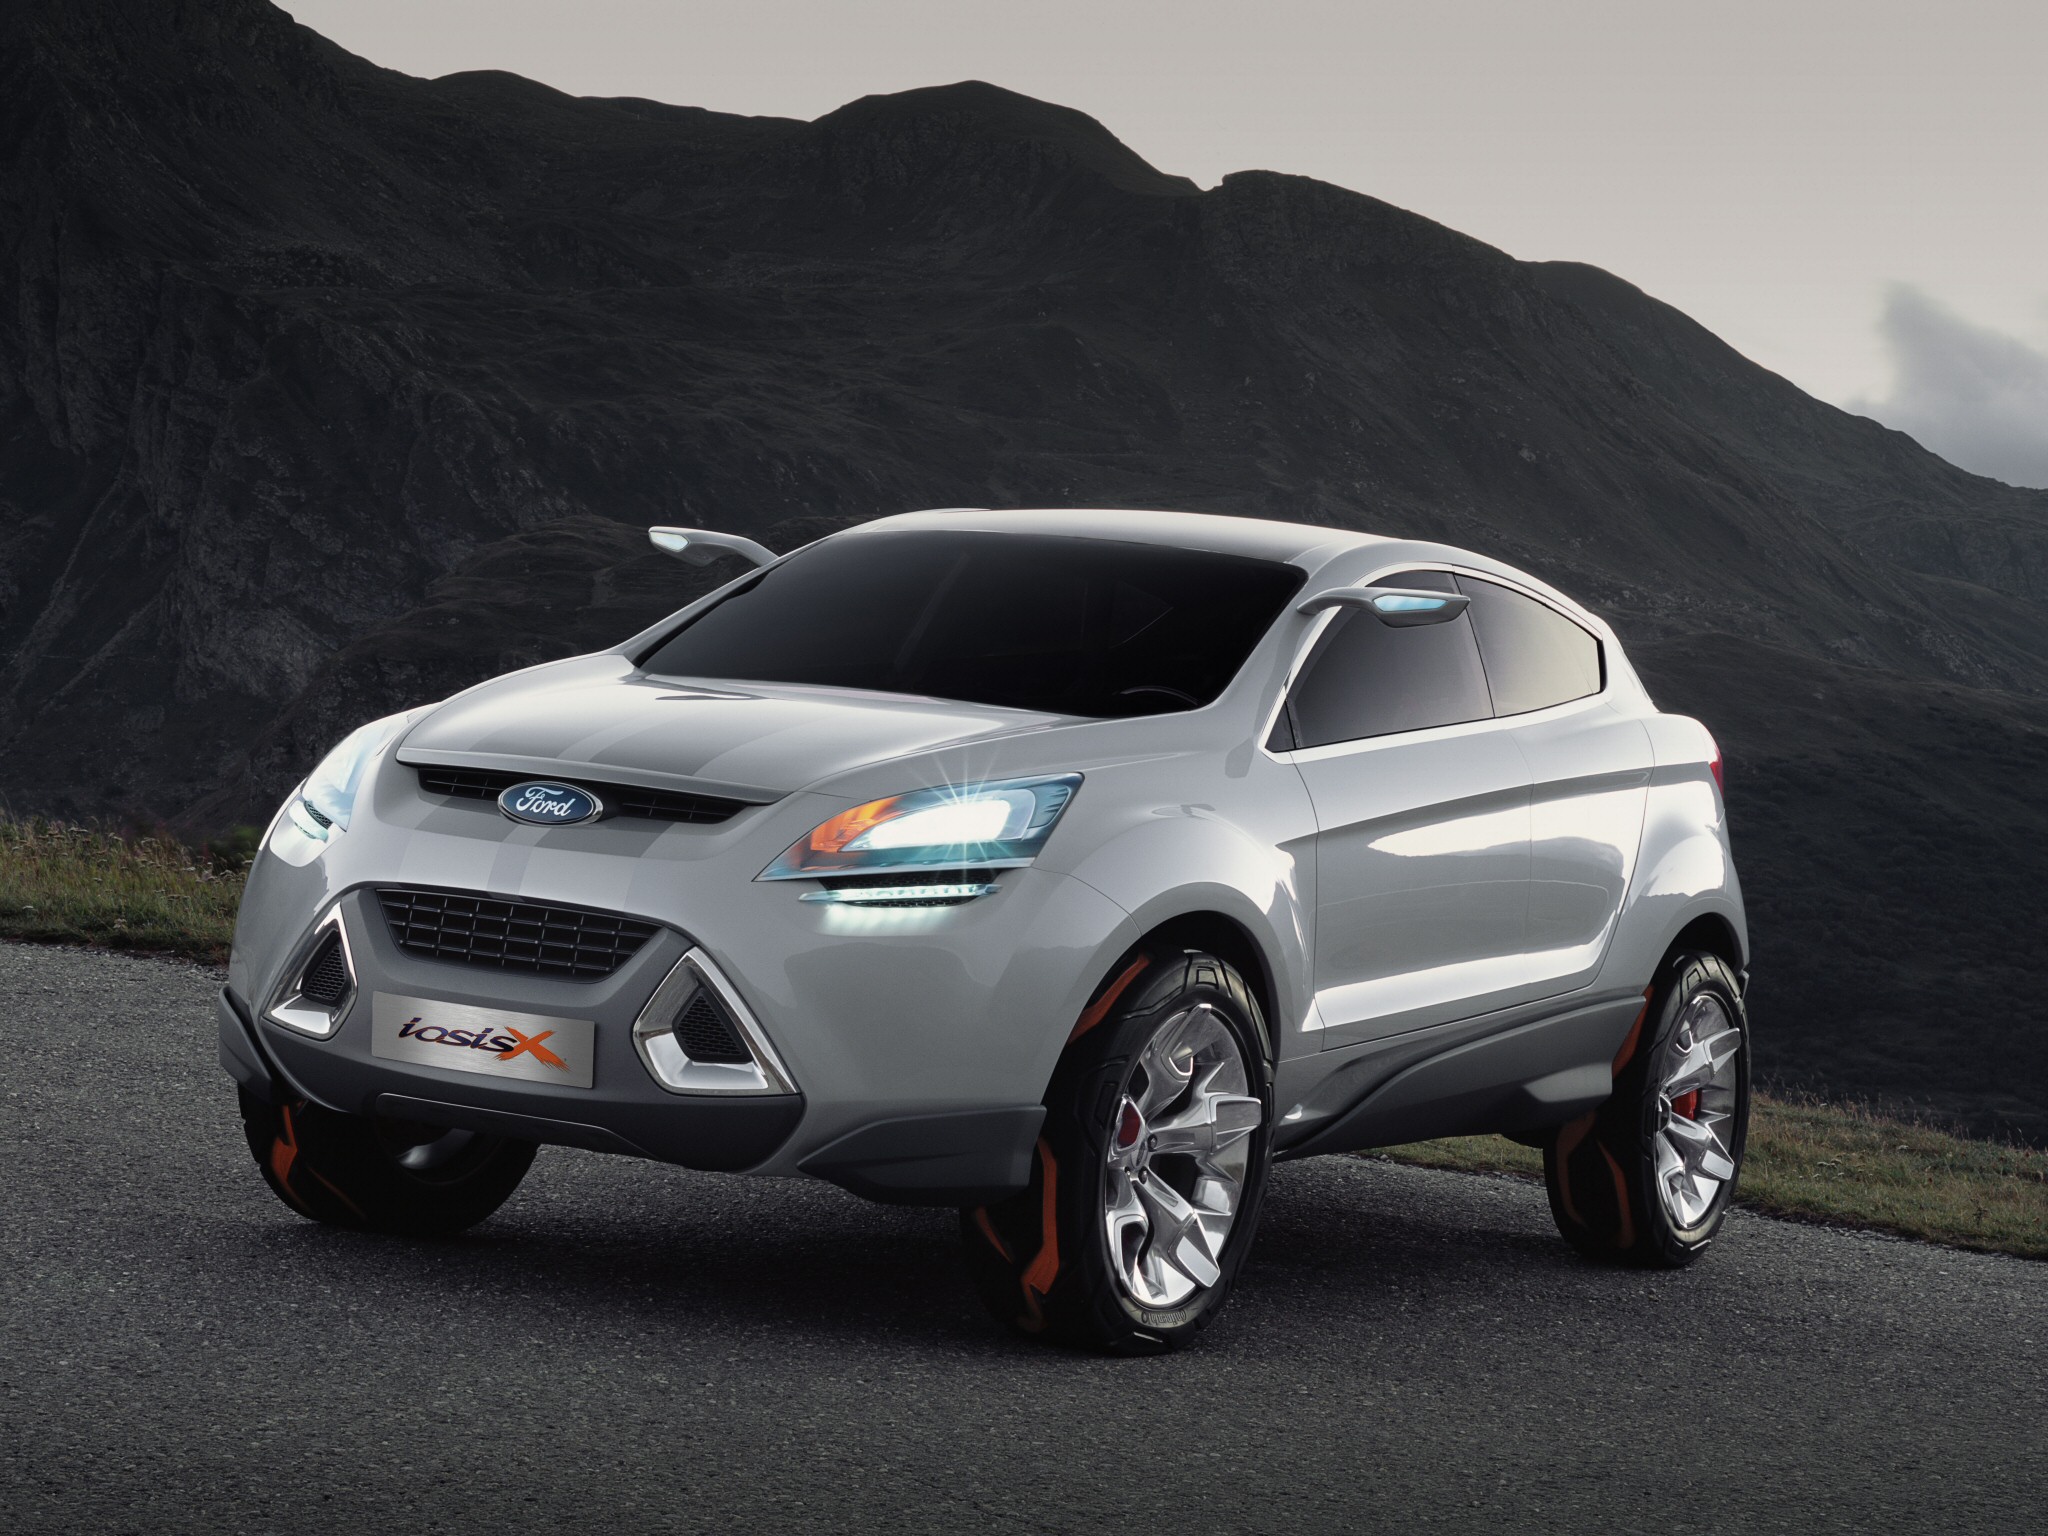 2006, Ford, Iosis x, Concept, Suv Wallpaper